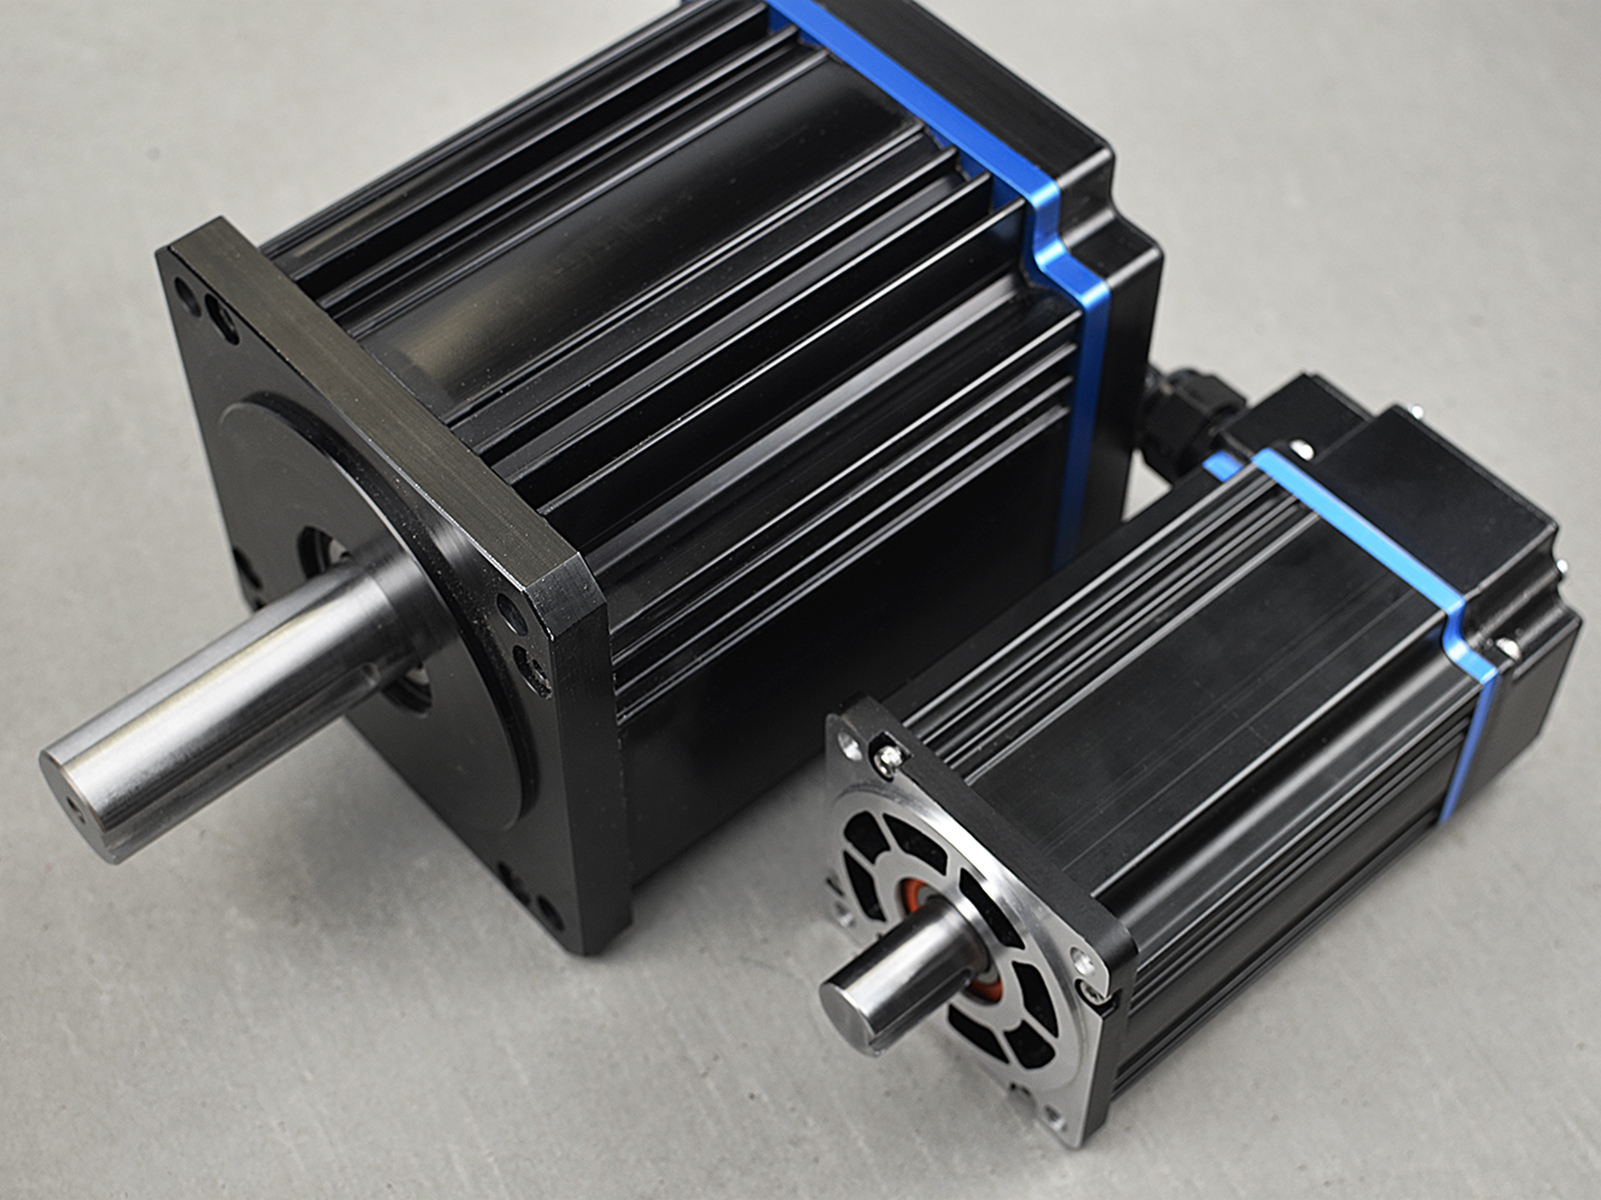 Direct-drive motor technology reduces energy costs